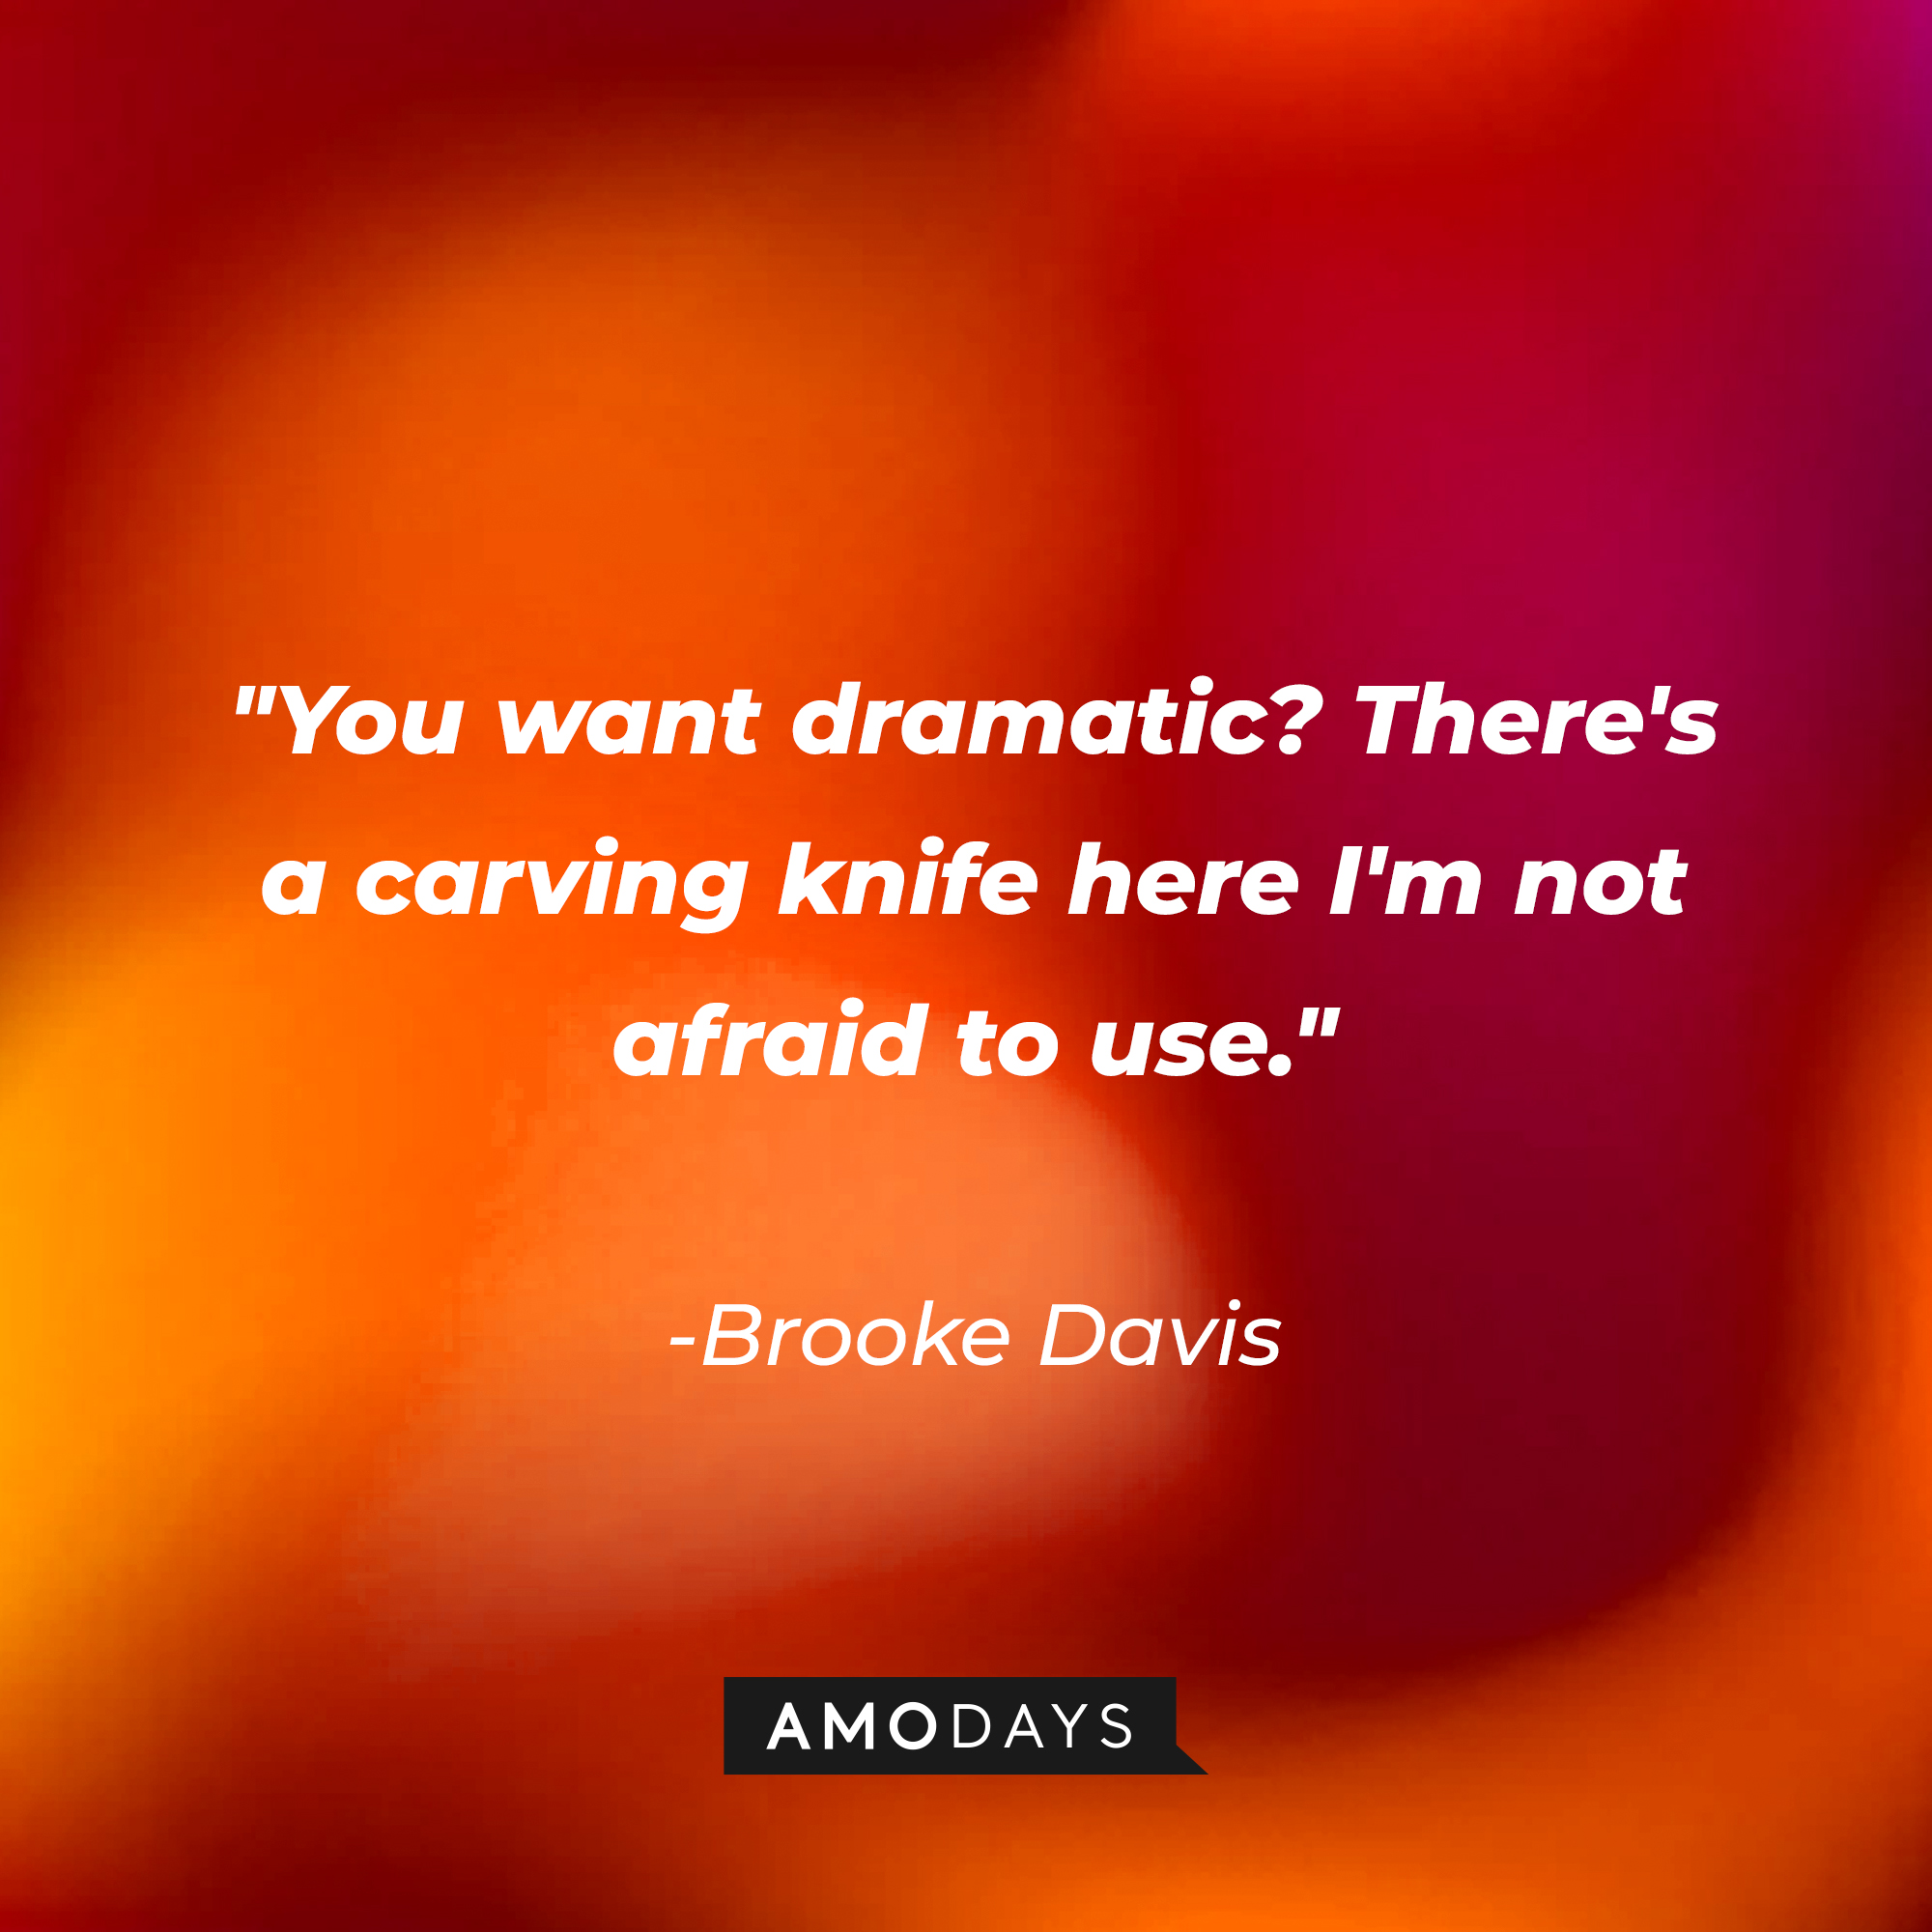 Brooke Davis' quote: "You want dramatic? There's a carving knife here I'm not afraid to use." | Source: AmoDays